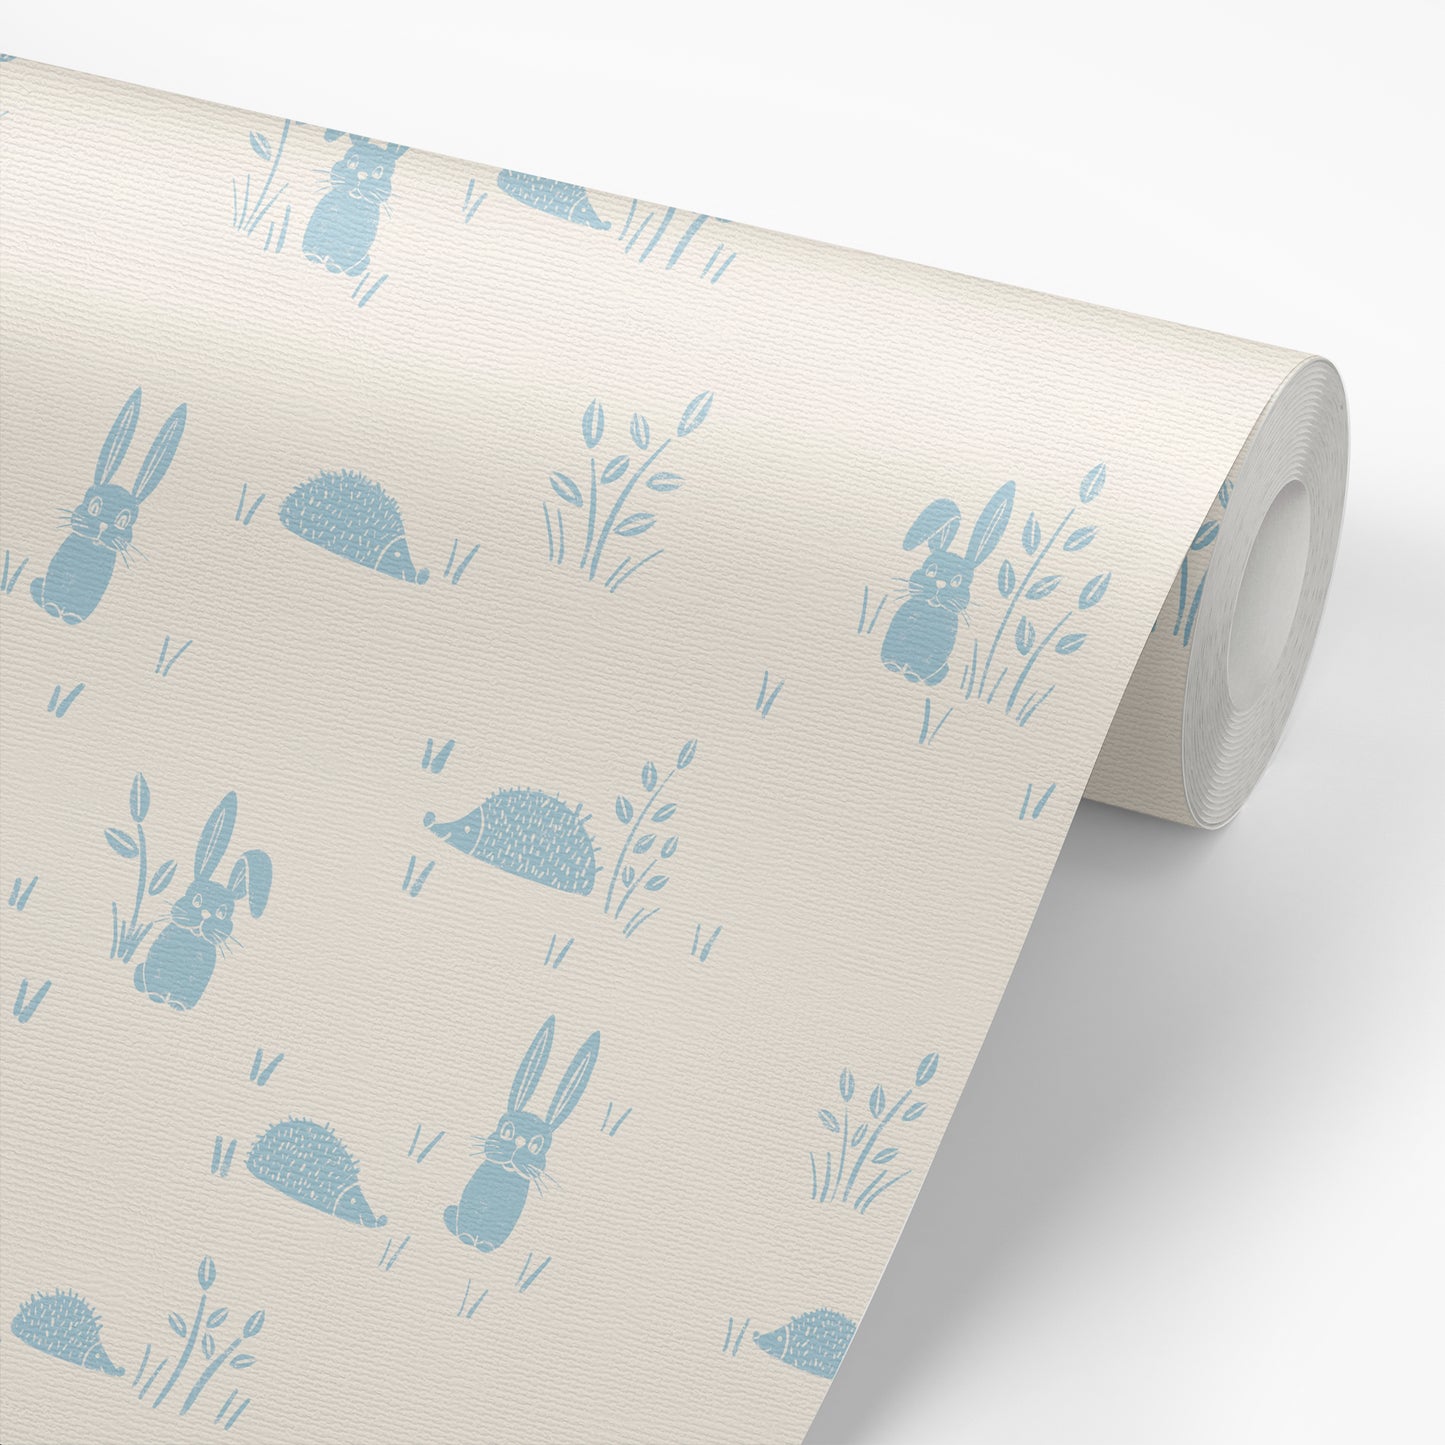 Hedgehogs and Rabbits Wallpaper in Blue shown on a roll of wallpaper.